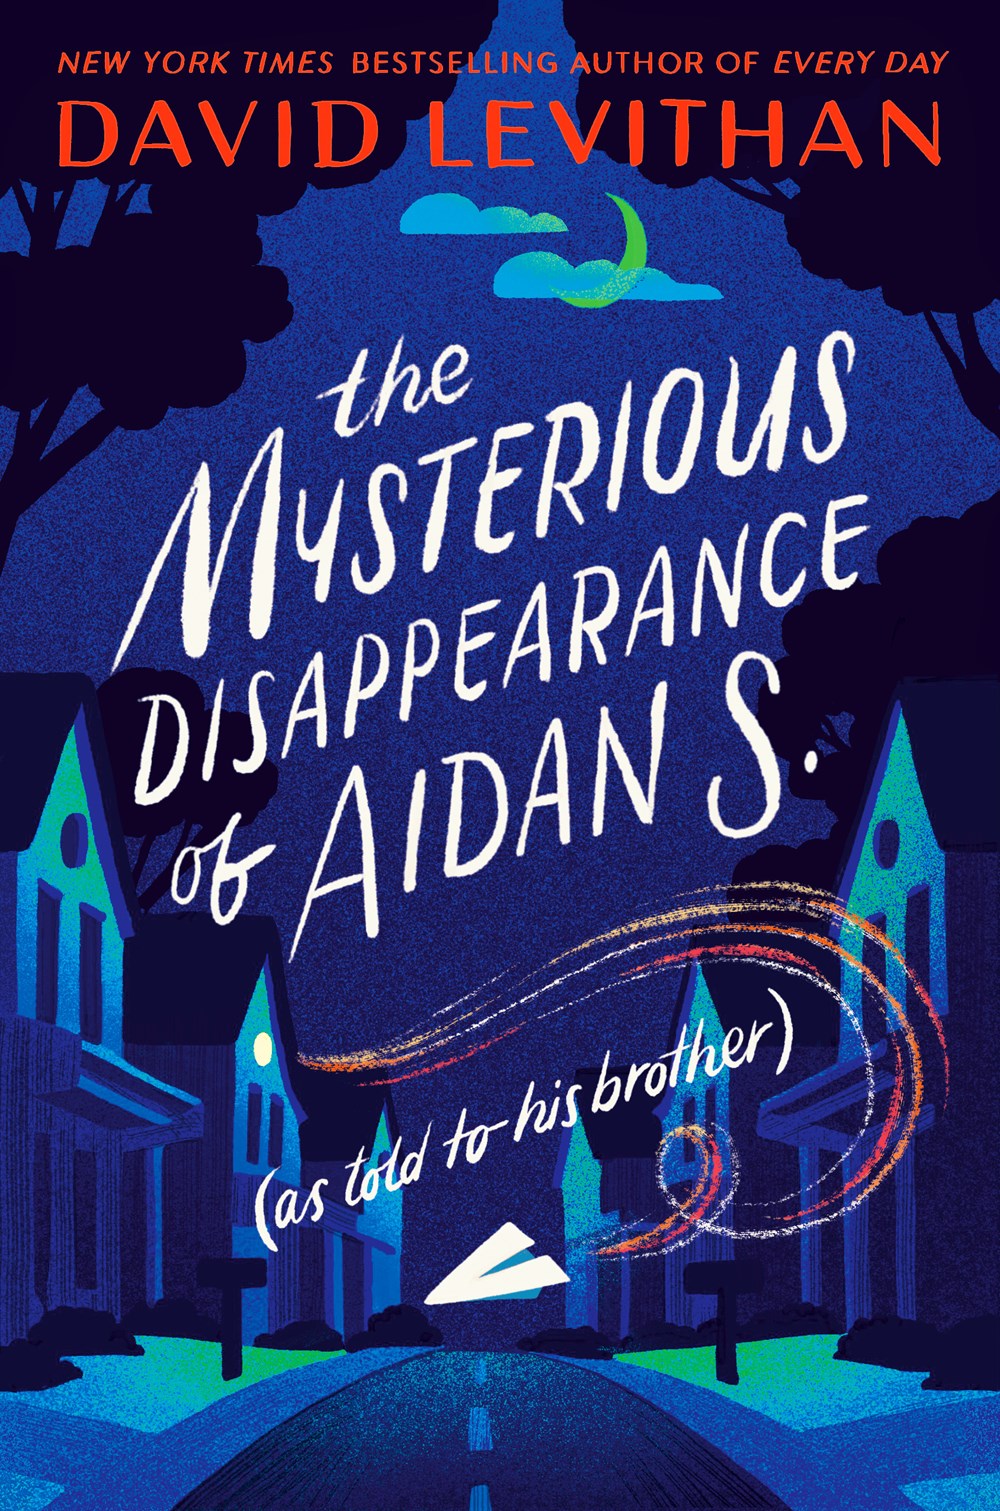 The Mysterious Disappearance of Aidan S. (2021, Knopf Books for Young Readers)